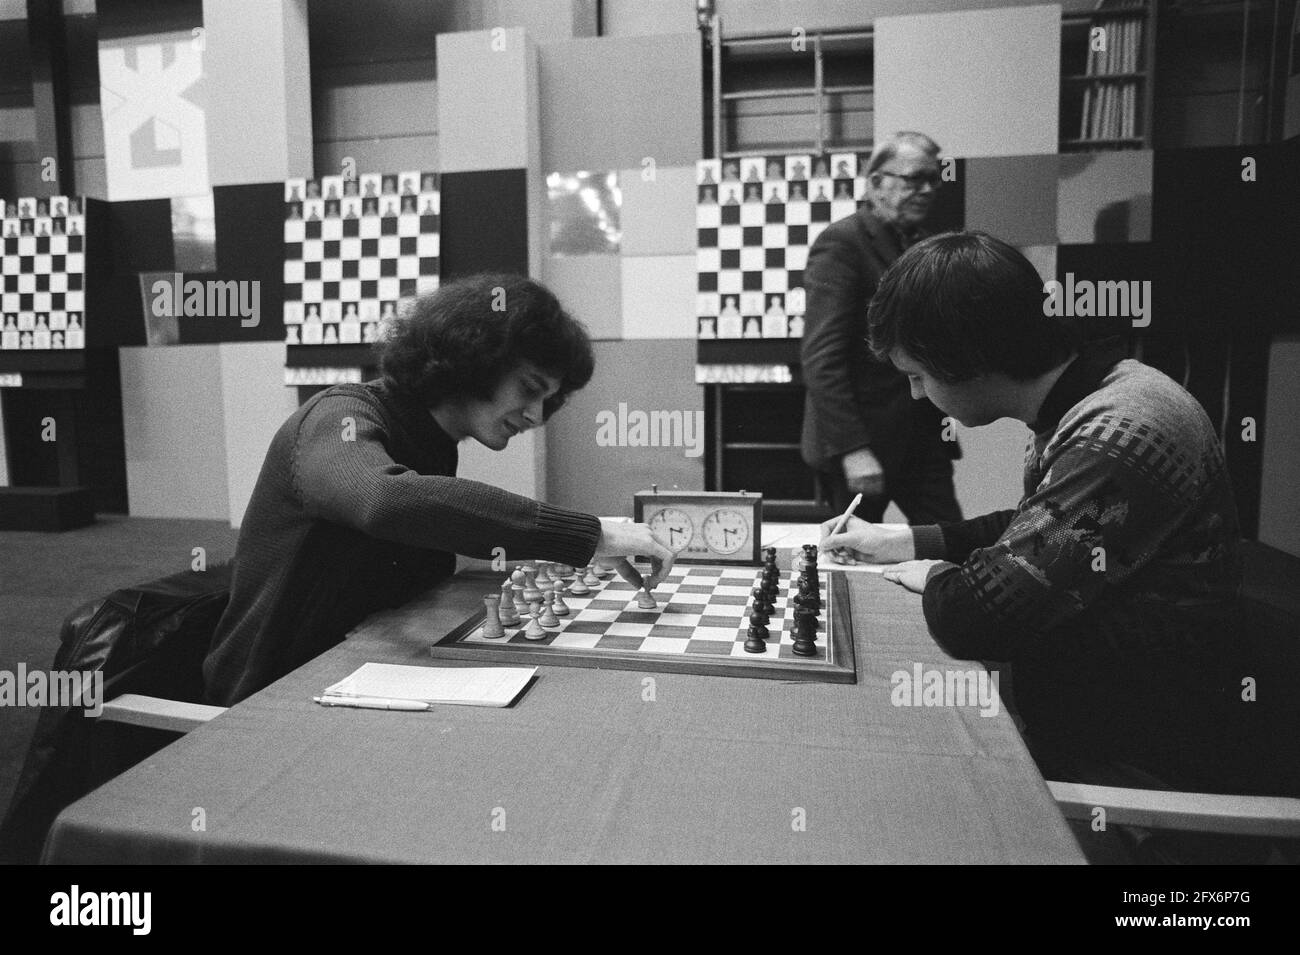 Hoogovens Chess Tournament, penultimate round. 6a Timman (r.) and Nunn (l.) in conversation, 7a.8a Nunn (l.) against Van der Wiel, January 29, 1982, chess, tournaments, The Netherlands, 20th century press agency photo, news to remember, documentary, historic photography 1945-1990, visual stories, human history of the Twentieth Century, capturing moments in time Stock Photo